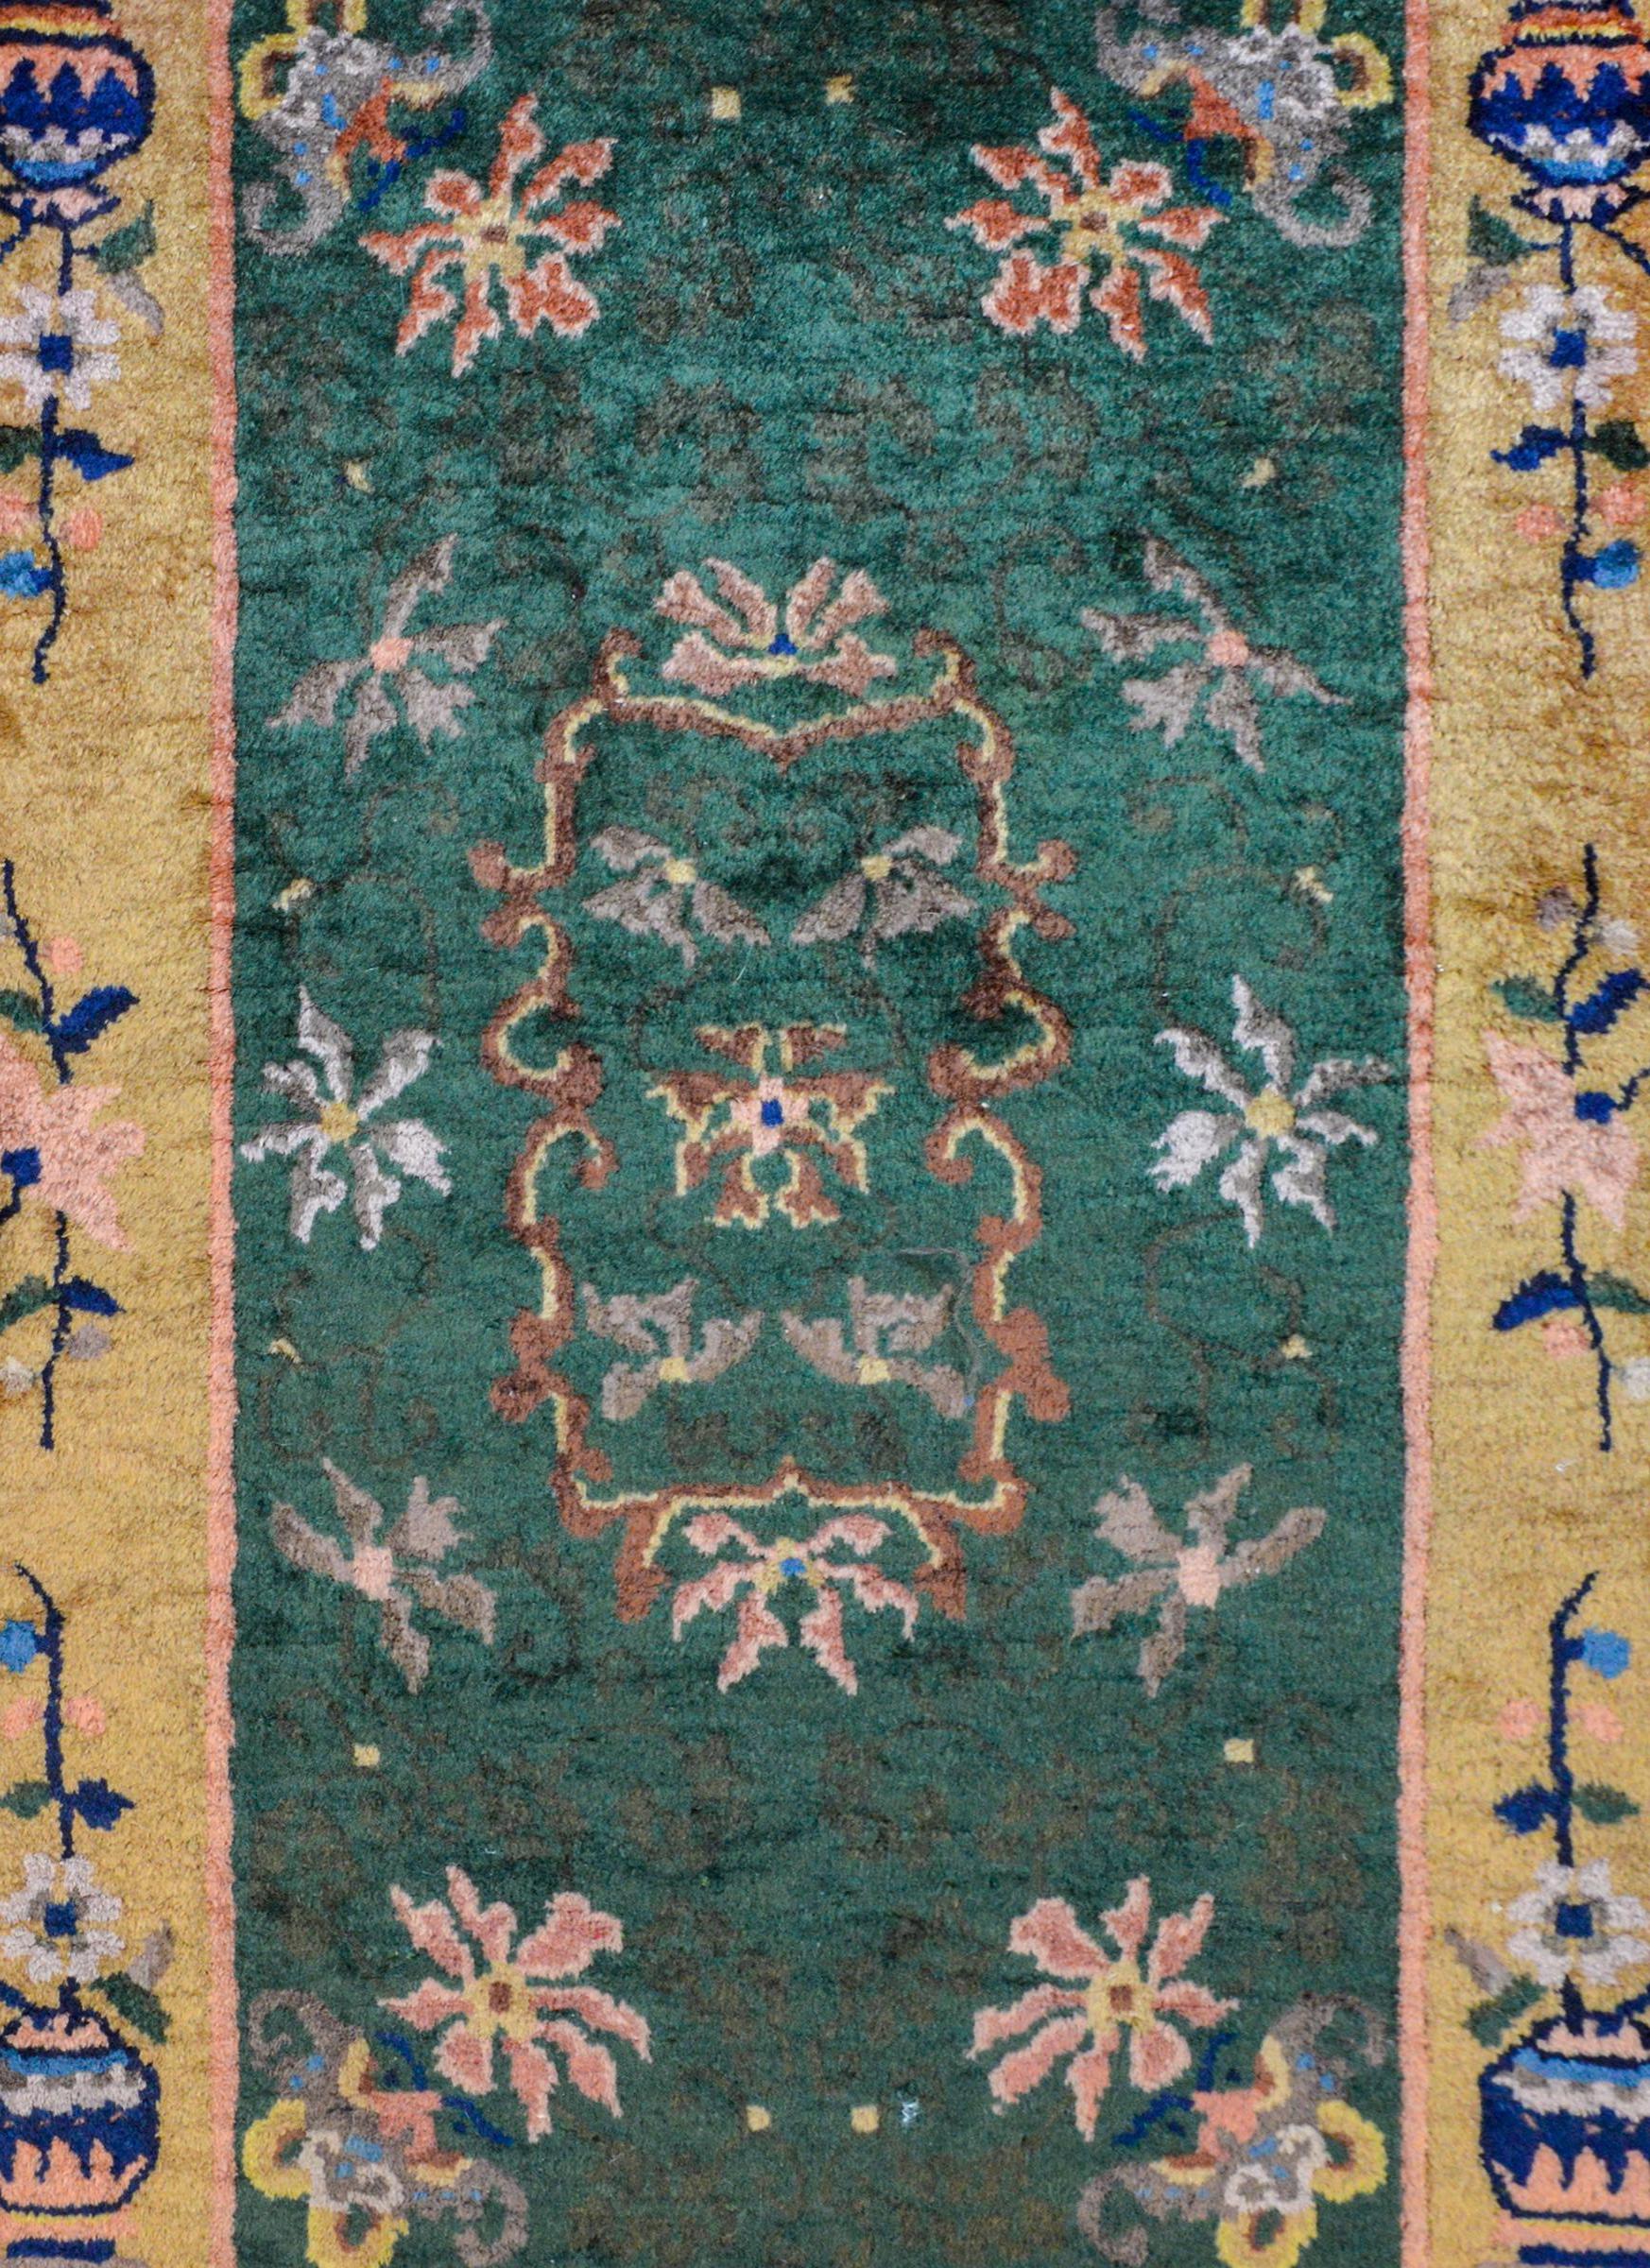 A sweet early 20th century Chinese Art Deco rug with beautiful pattern containing myriad chrysanthemums and lotus blossoms on a dark green background surrounded by a wide border containing scattered flowers and vines and a large potted peony in each